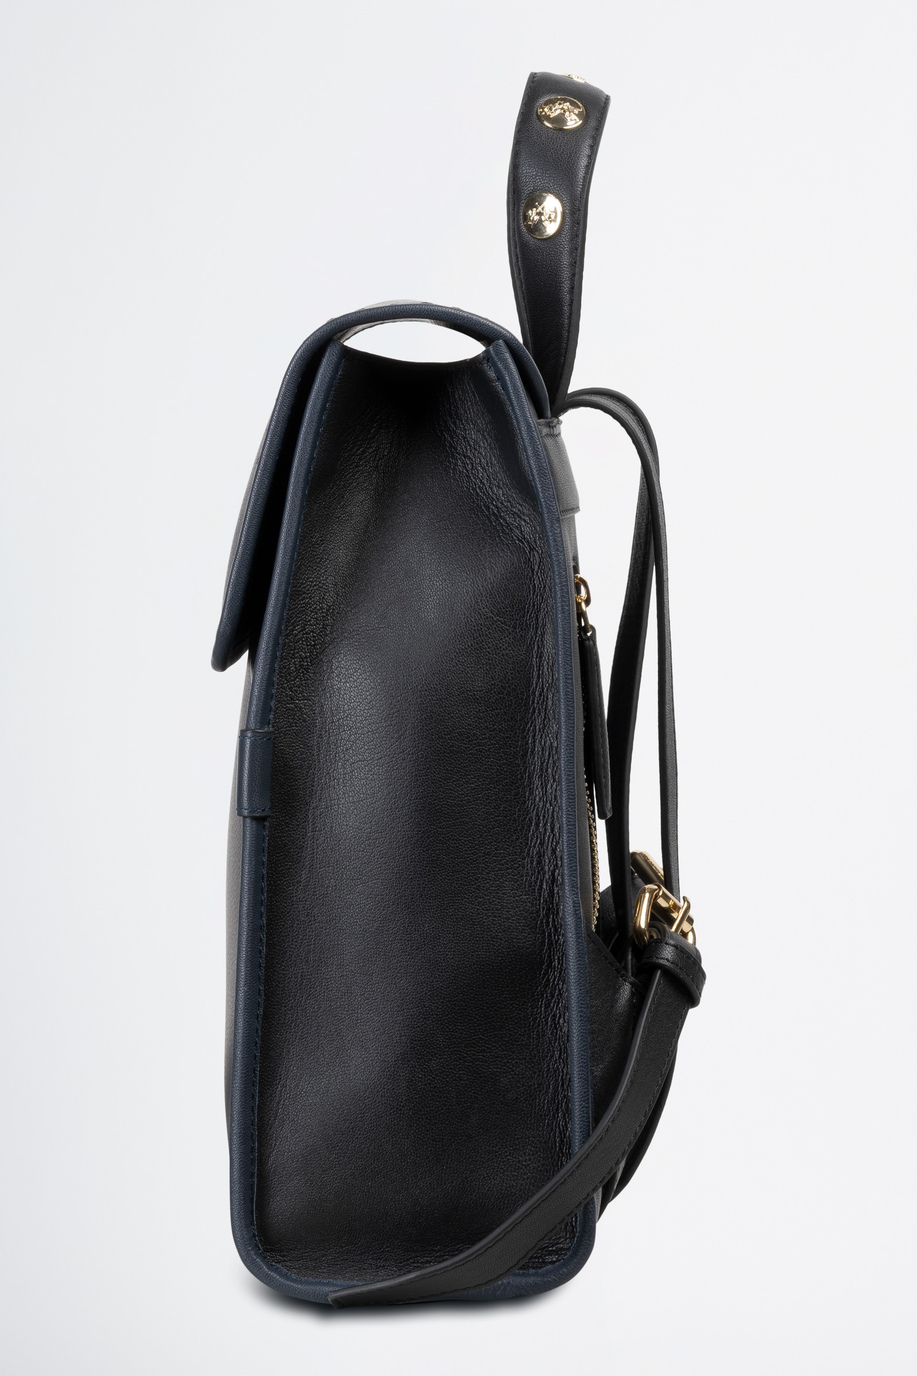 Backpack in calf leather leather - Accessories for her | La Martina - Official Online Shop